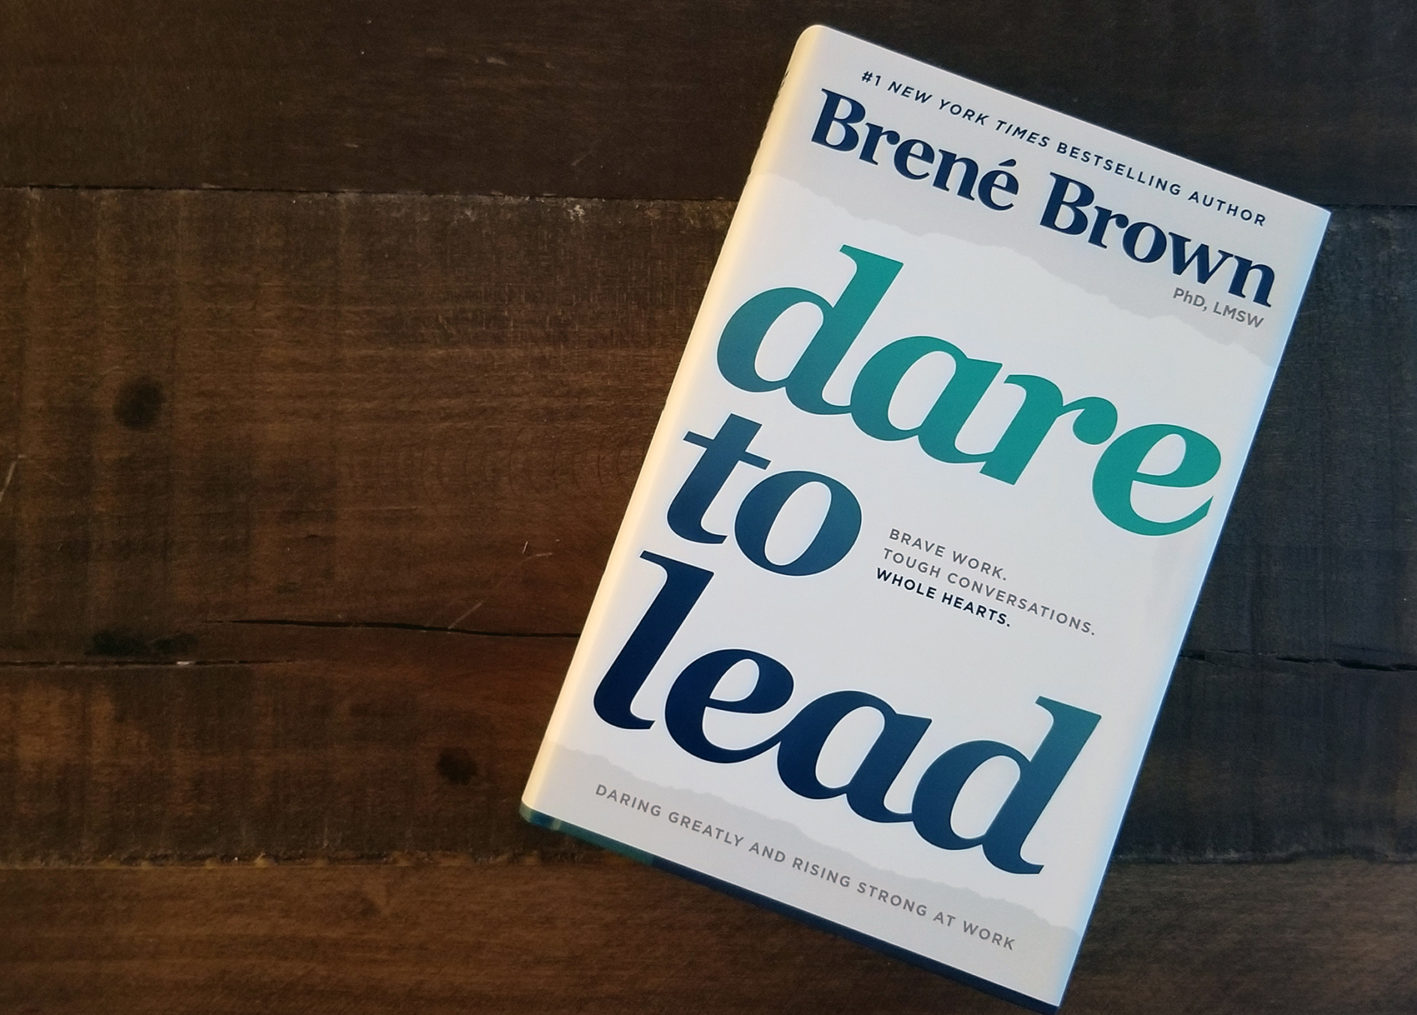 dare to be great brene brown